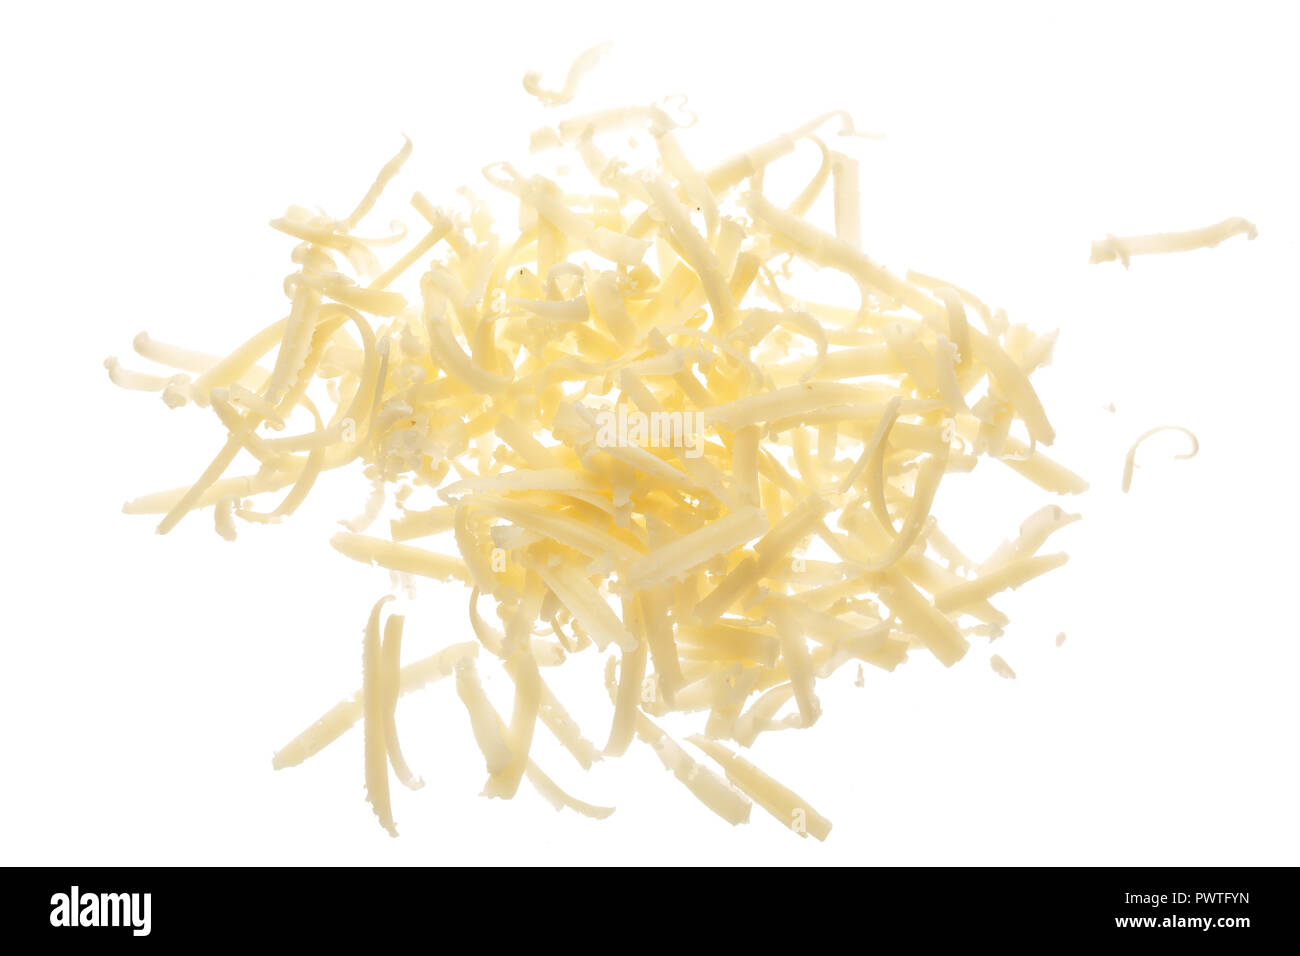 https://c8.alamy.com/comp/PWTFYN/grated-cheese-isolated-on-white-background-top-view-PWTFYN.jpg